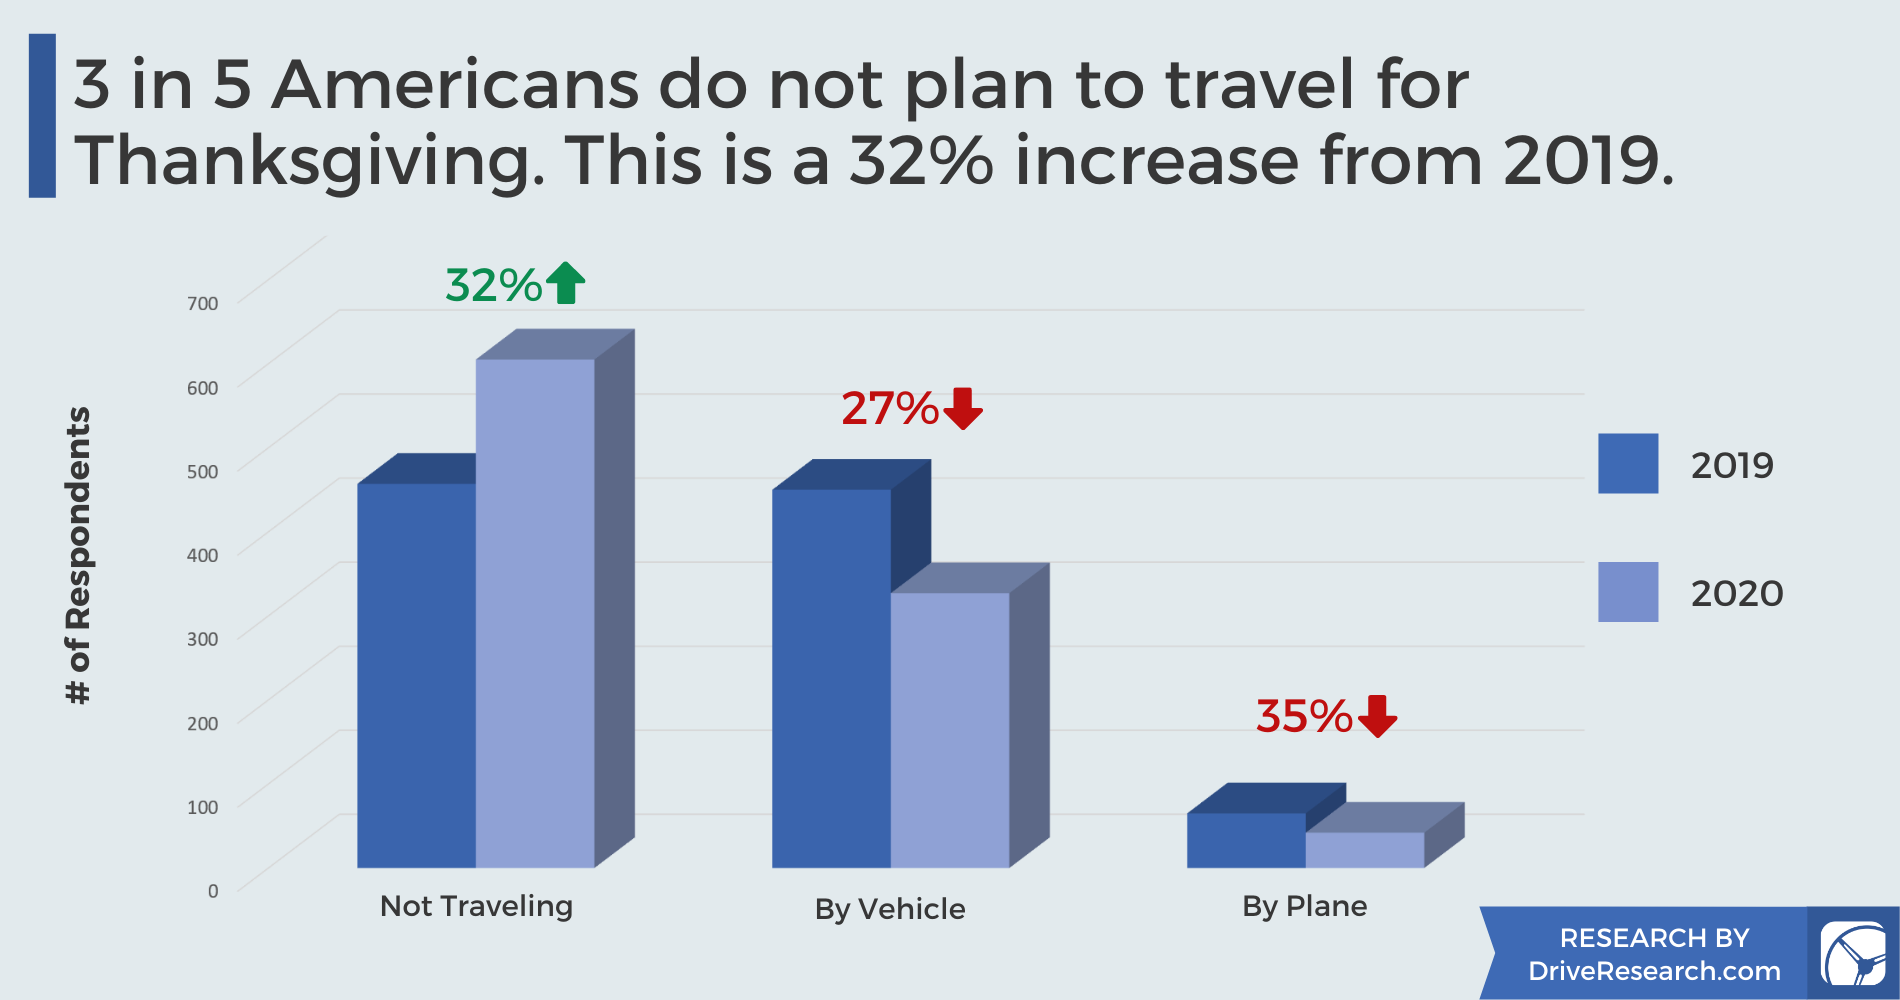 3 in 5 Americans do not plan to travel for Thanksgiving. This is a 32% increase from 2019.